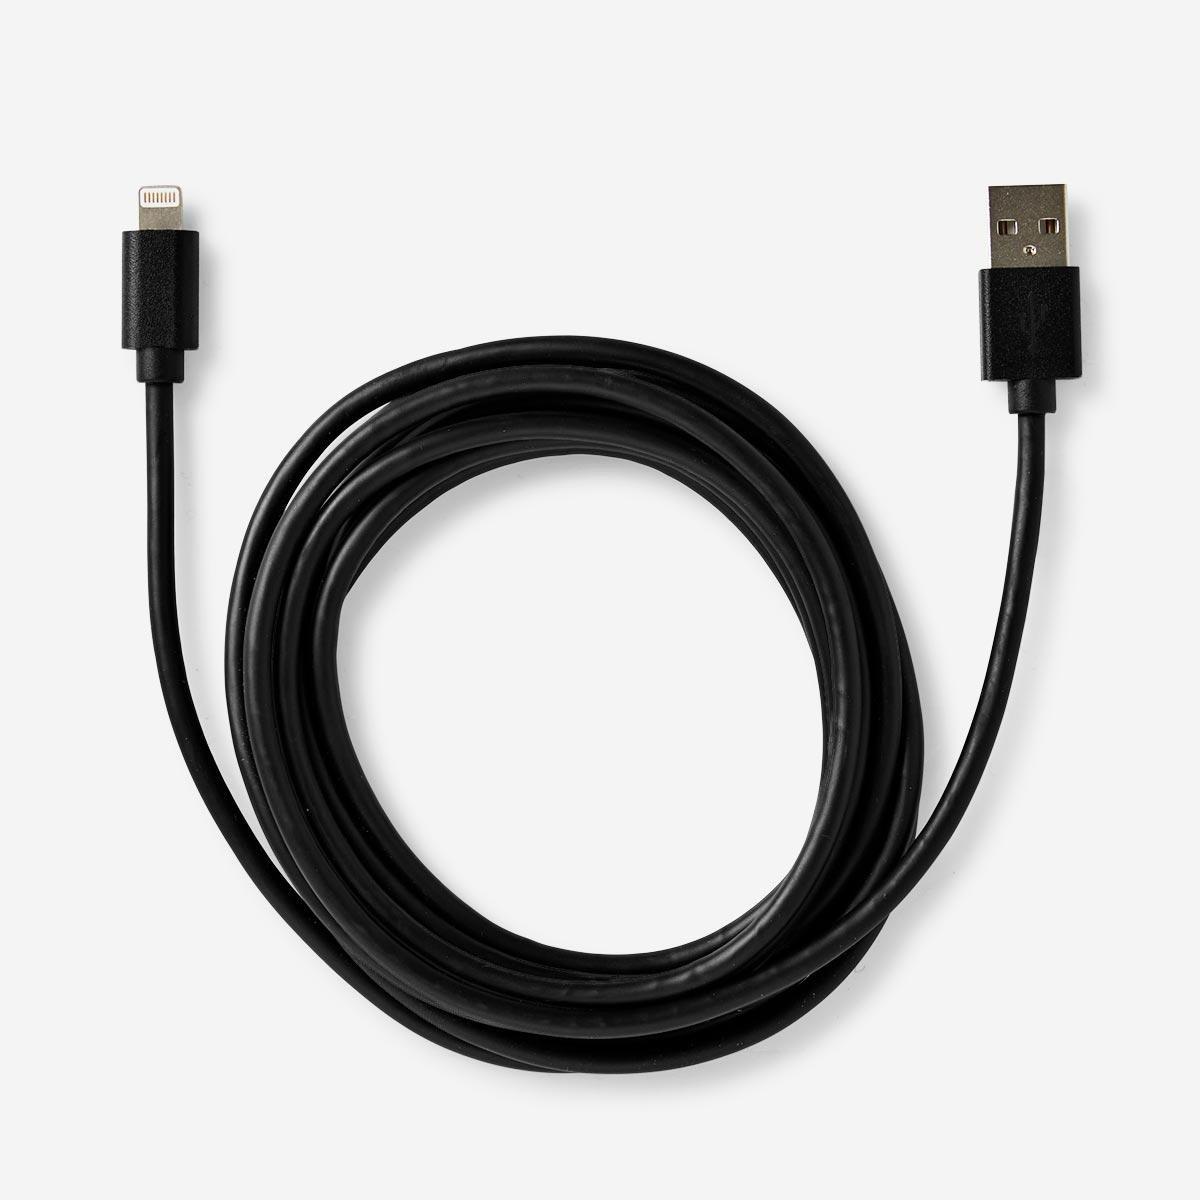 Black iphones charging cable.